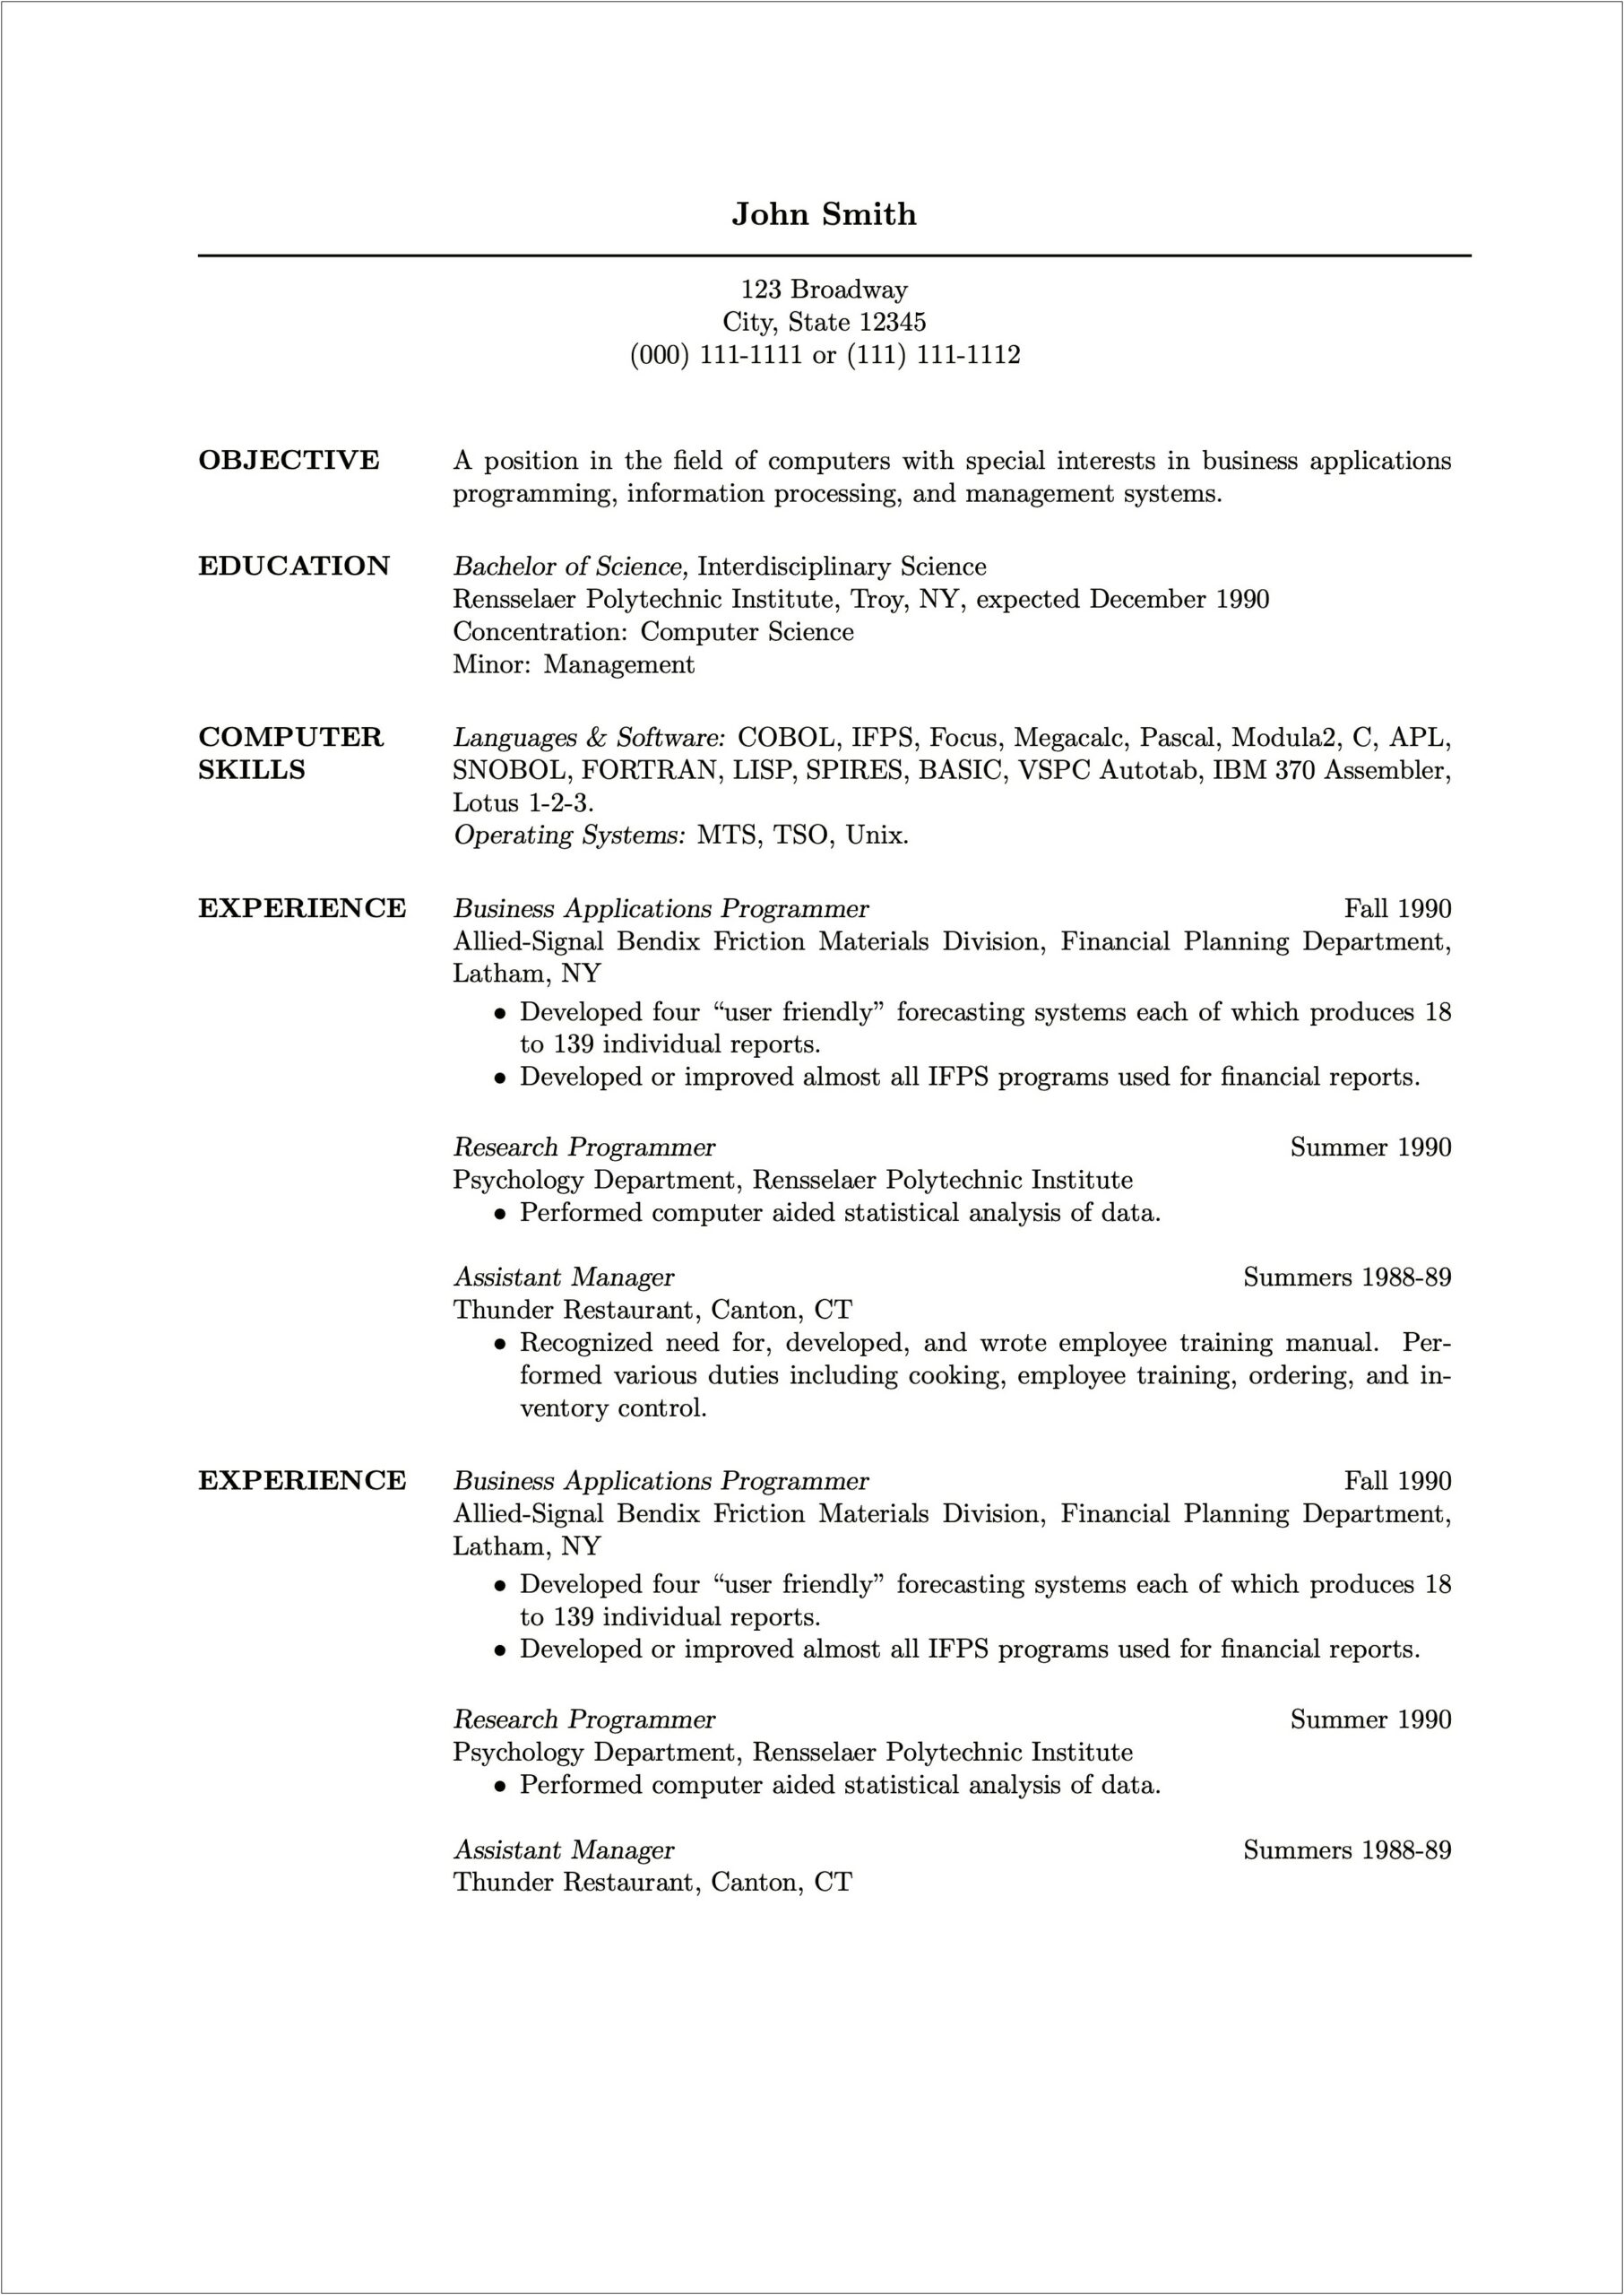 Chicago Manual Of Style Resume Managing Editor